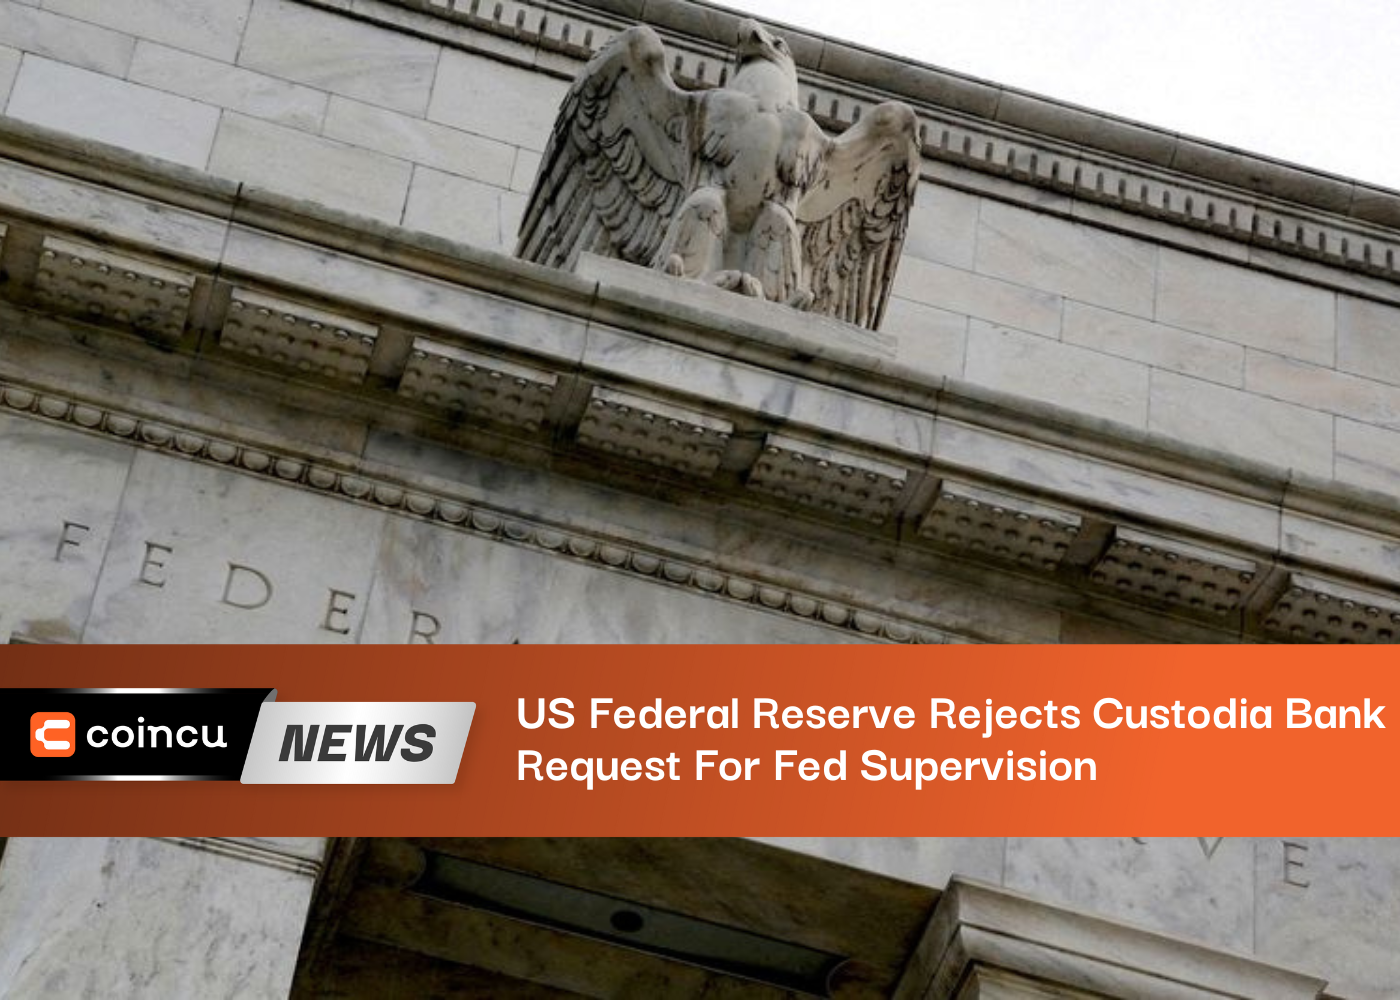 US Federal Reserve Rejects Custodia Bank